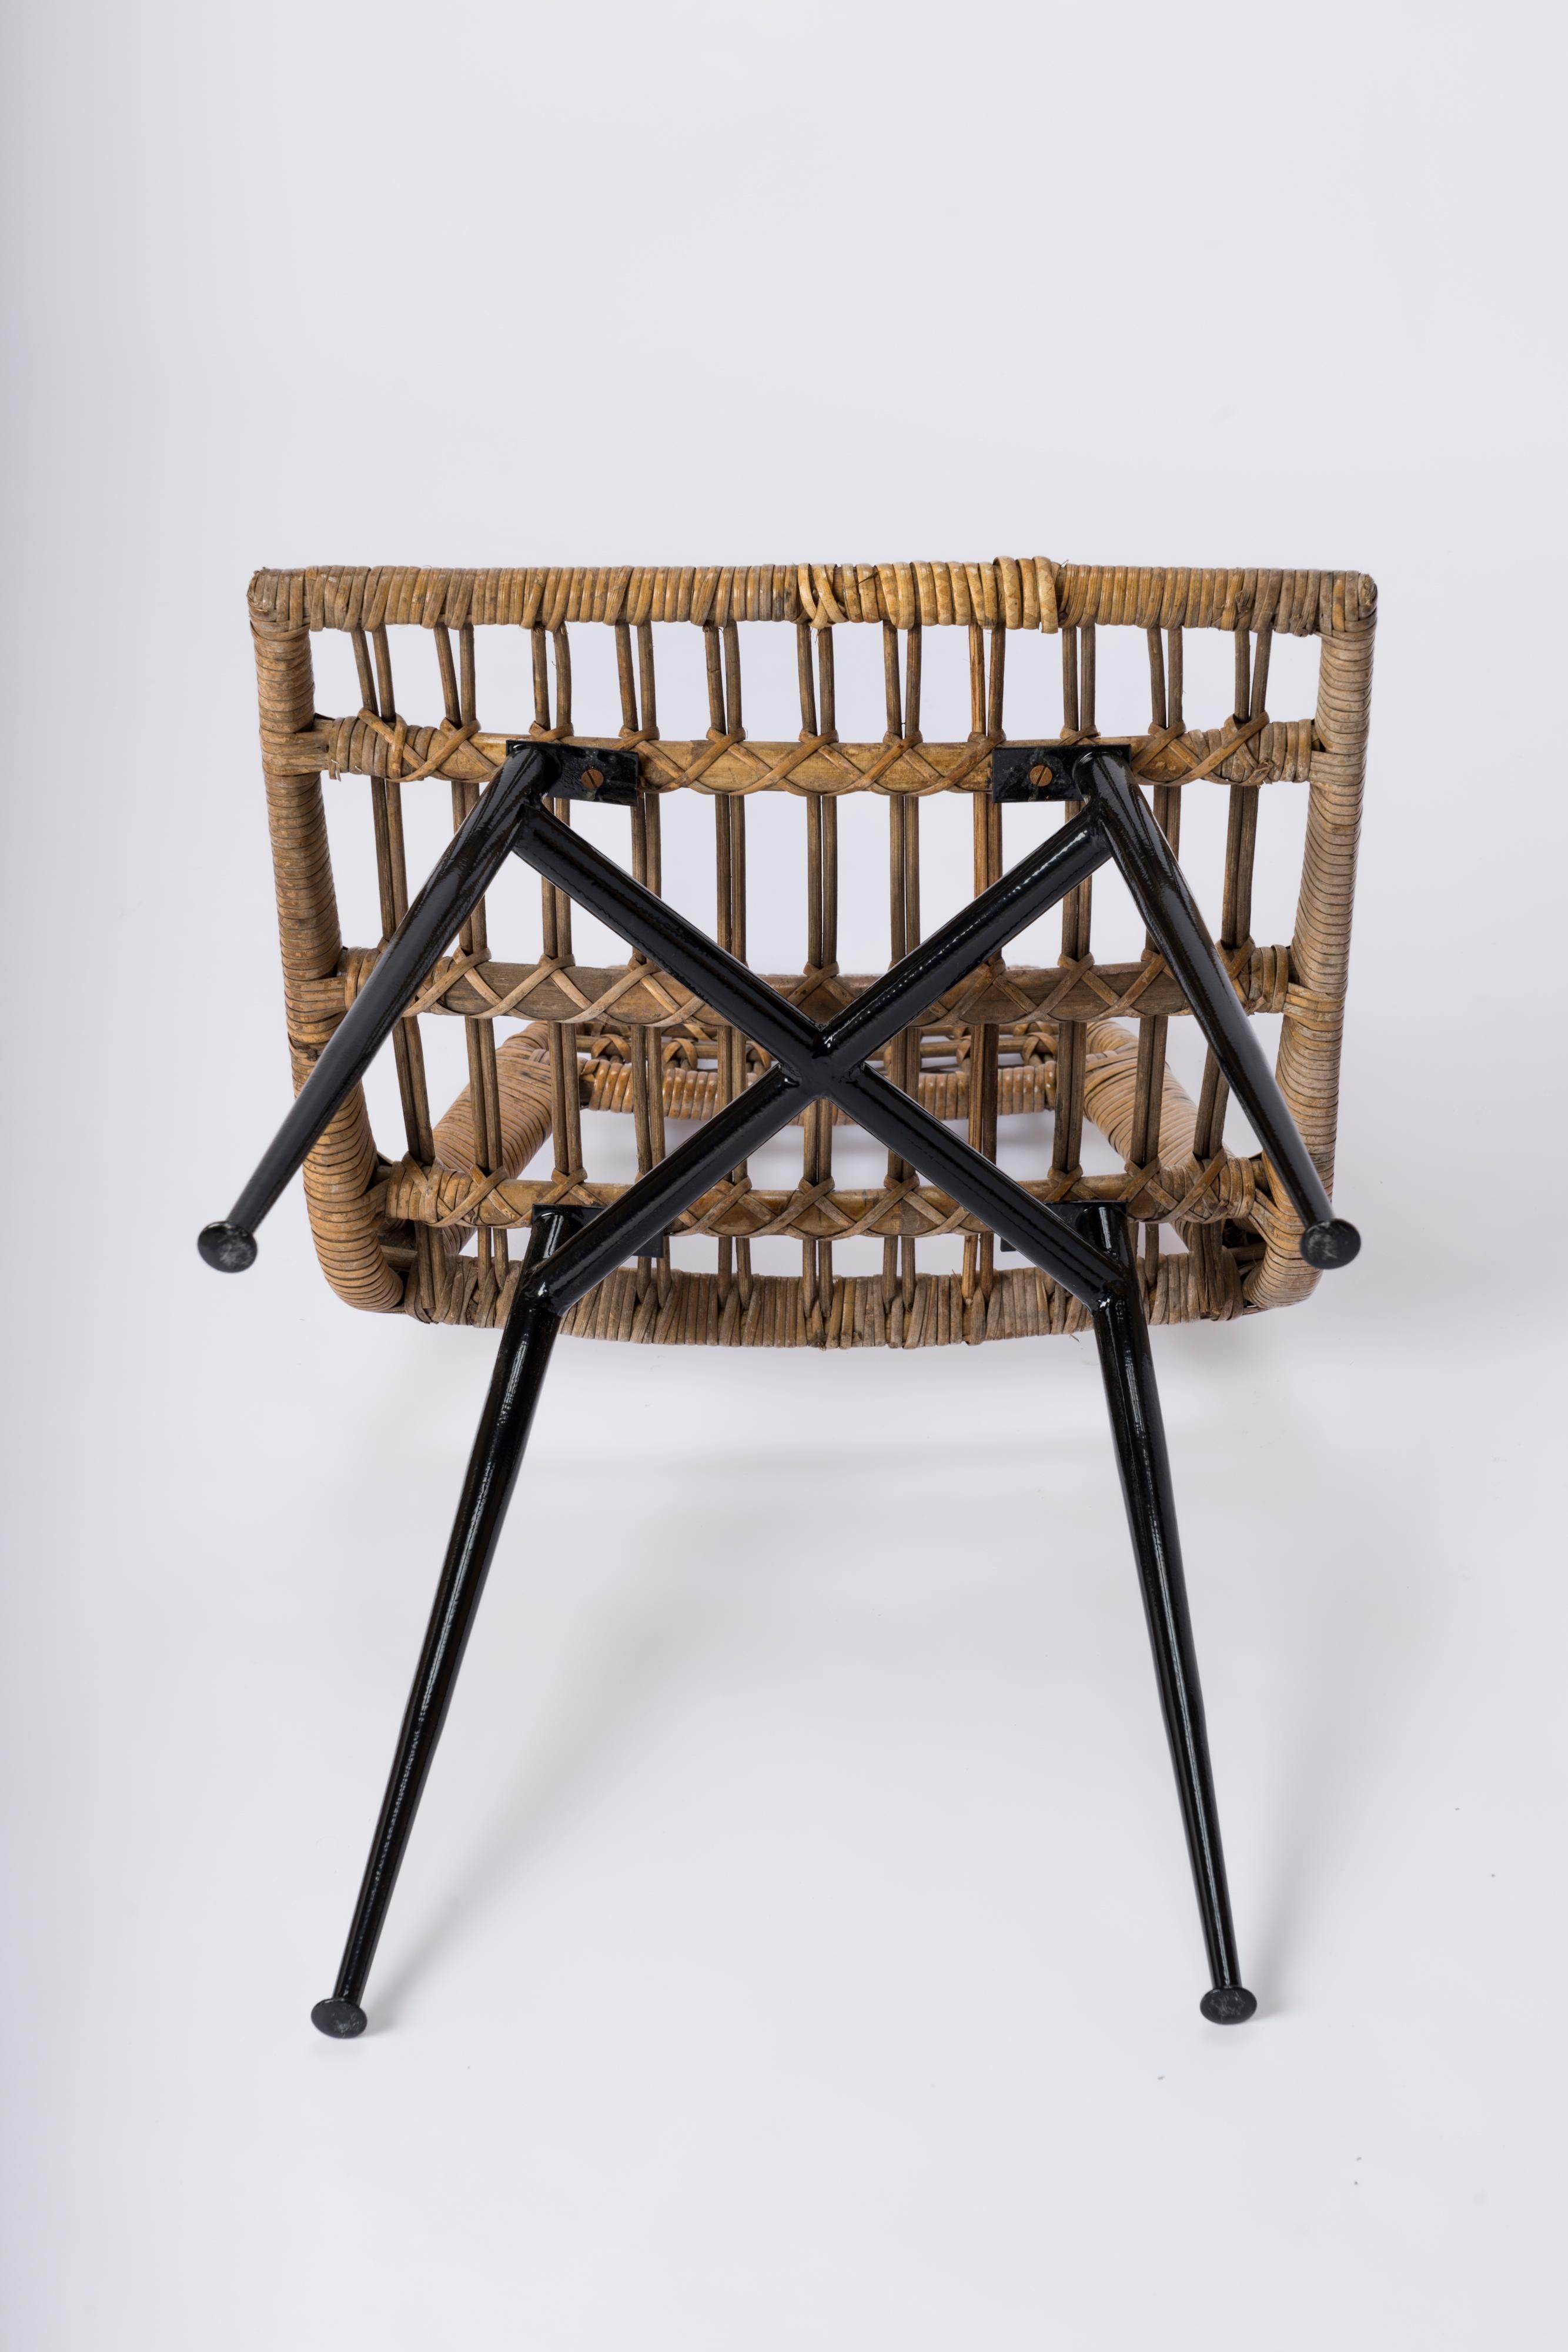 Four Rattan & Black Enameled Steel Chairs by Lucien Carrier - France 1950s For Sale 4